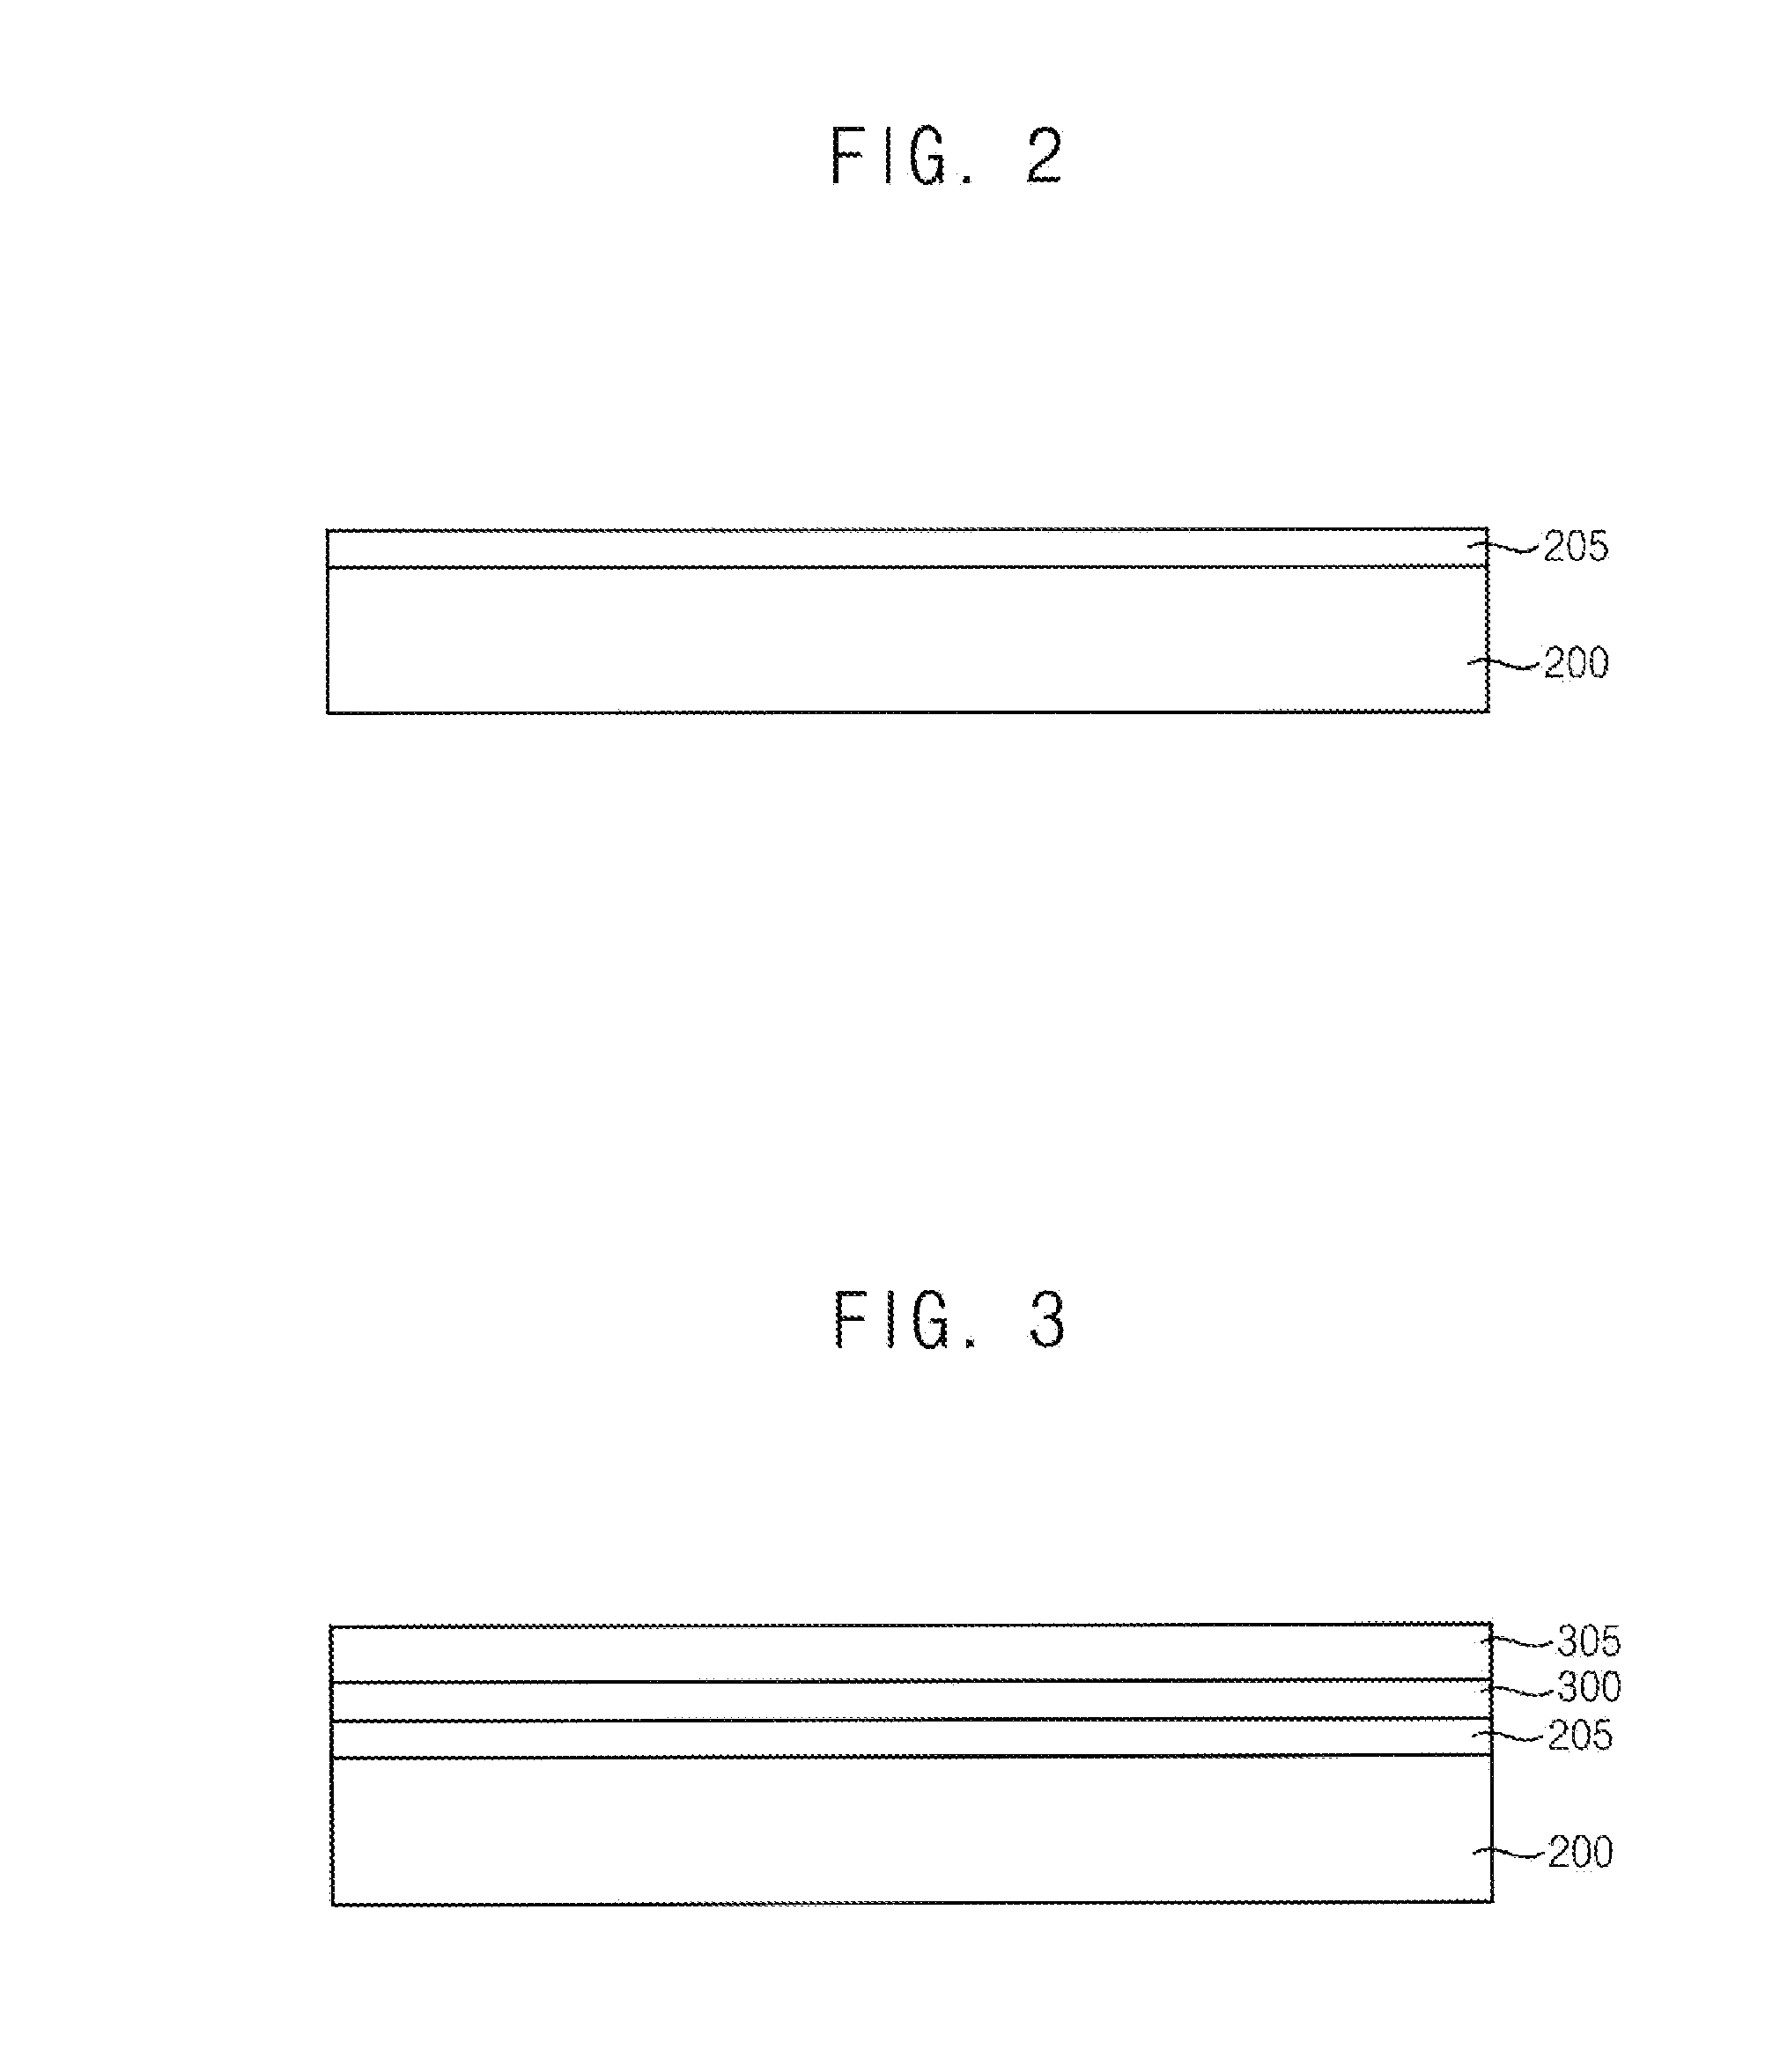 Display device and method of manufacturing a display device